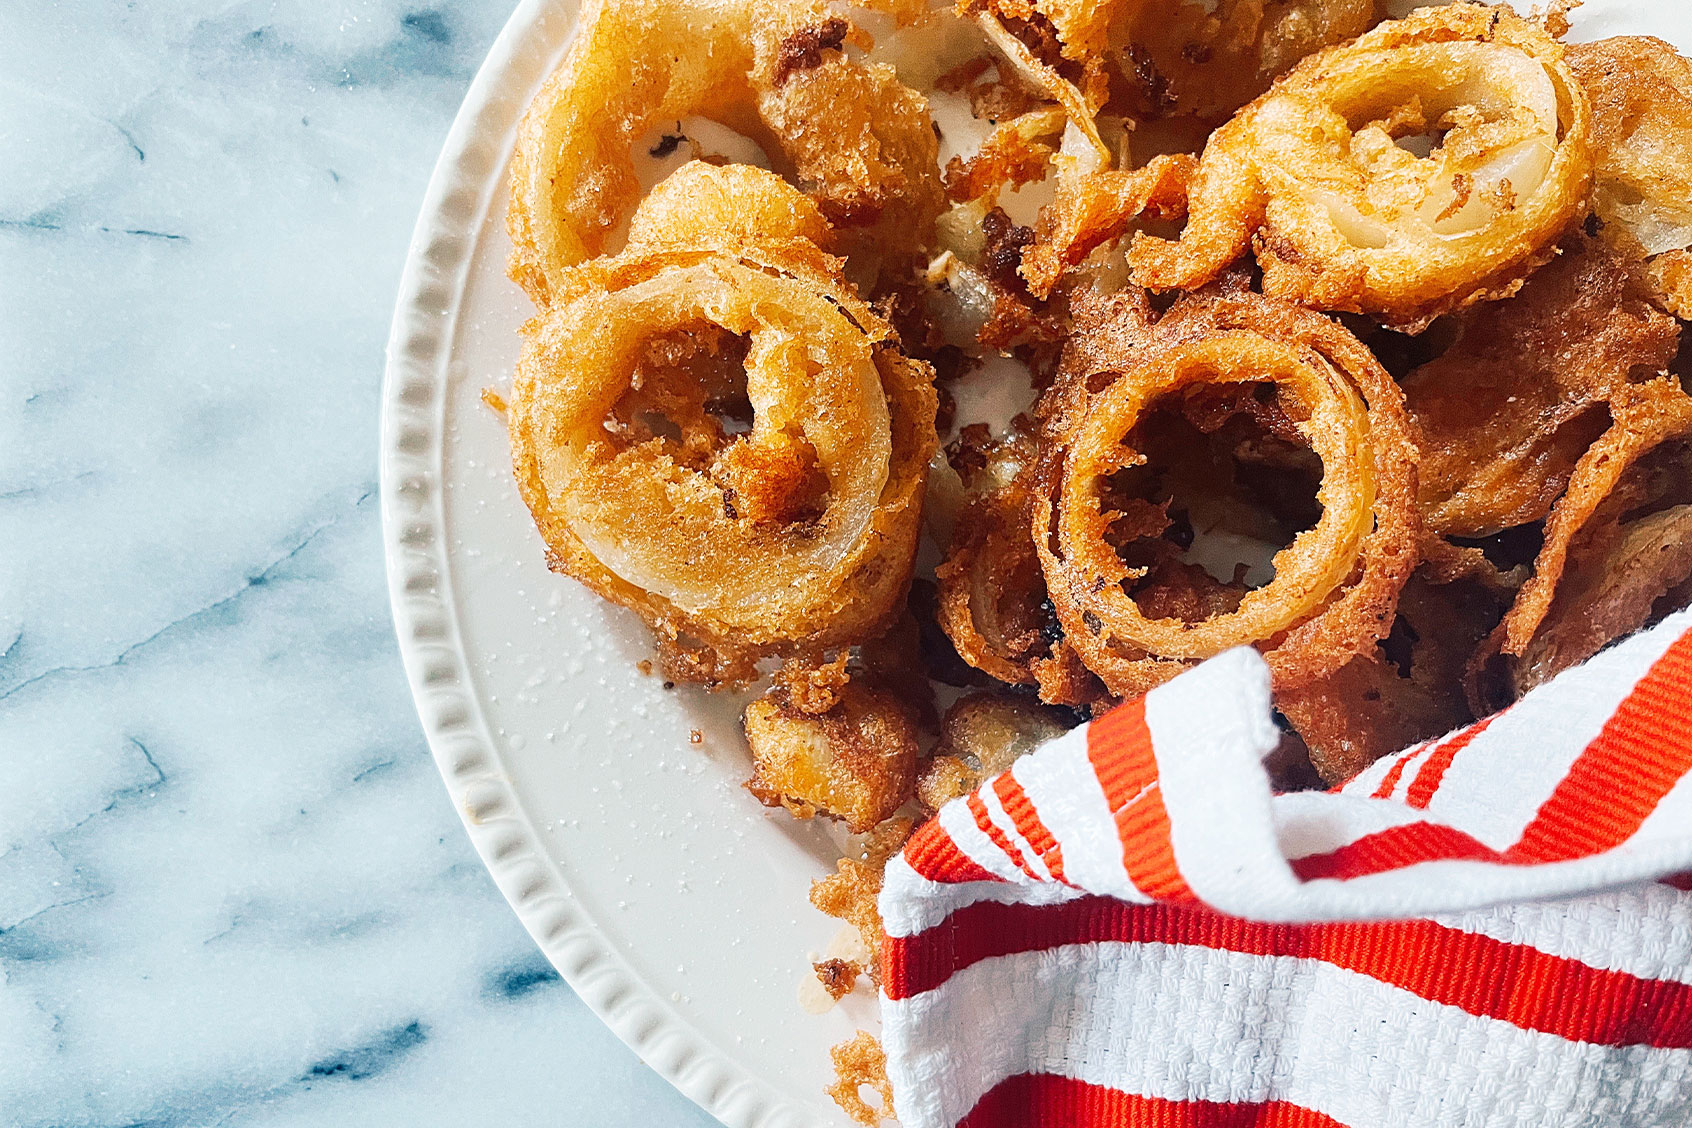 It’s almost too easy to make hot, fresh, fried onion rings